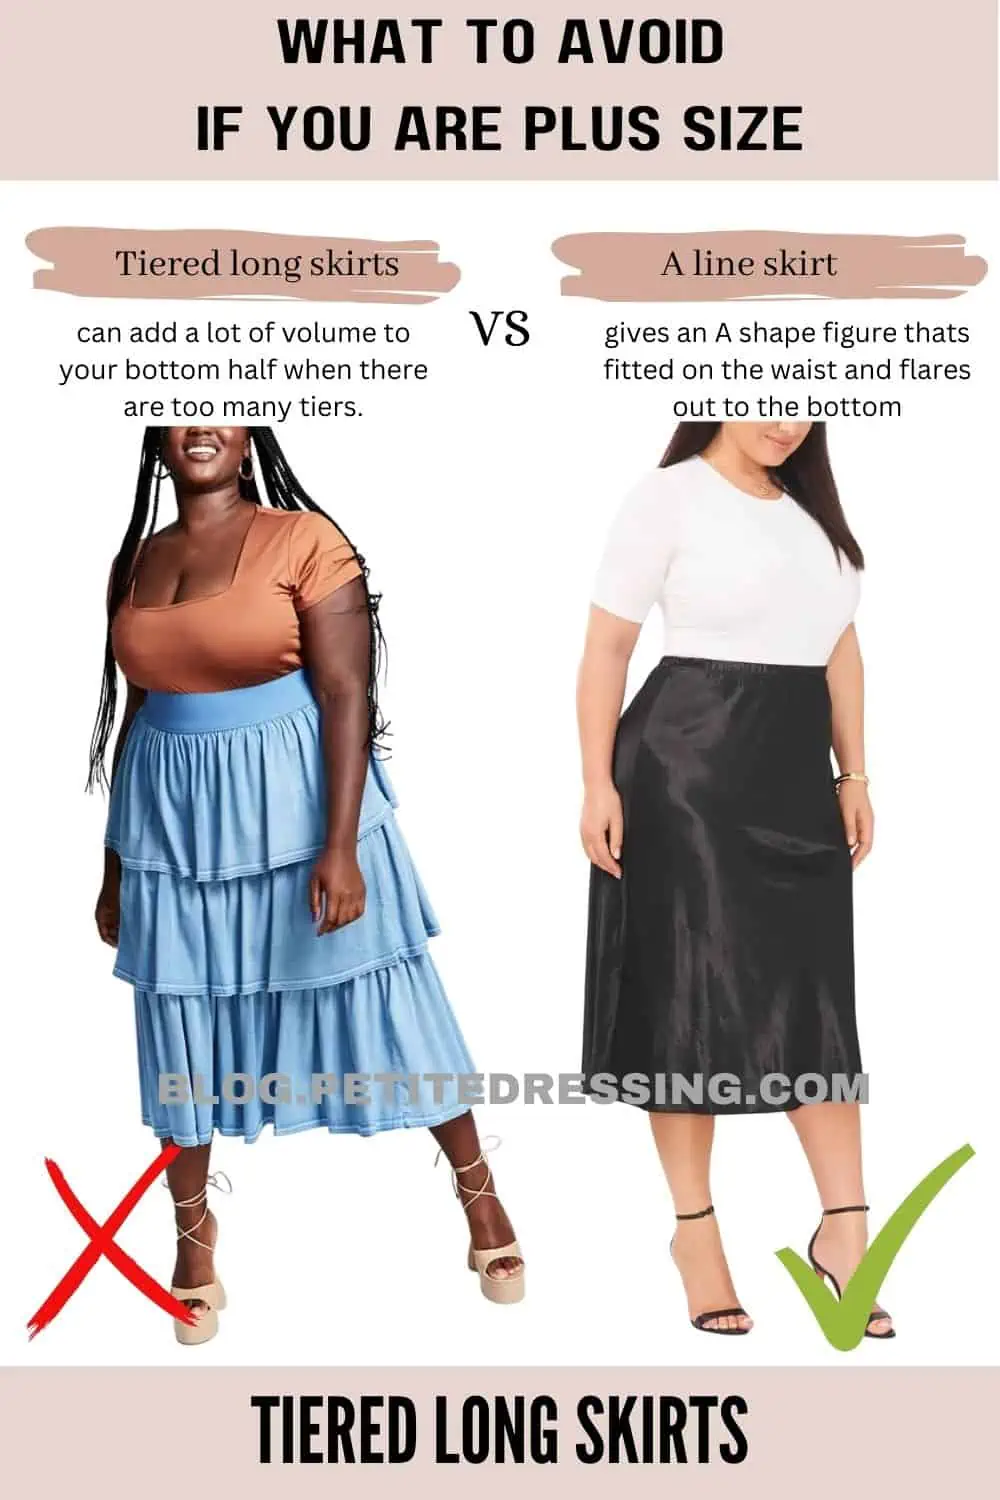 What Plus Size Should Not Wear - Petite Dressing  Plus size, Plus size  boyfriend jeans, Plus size fashion tips